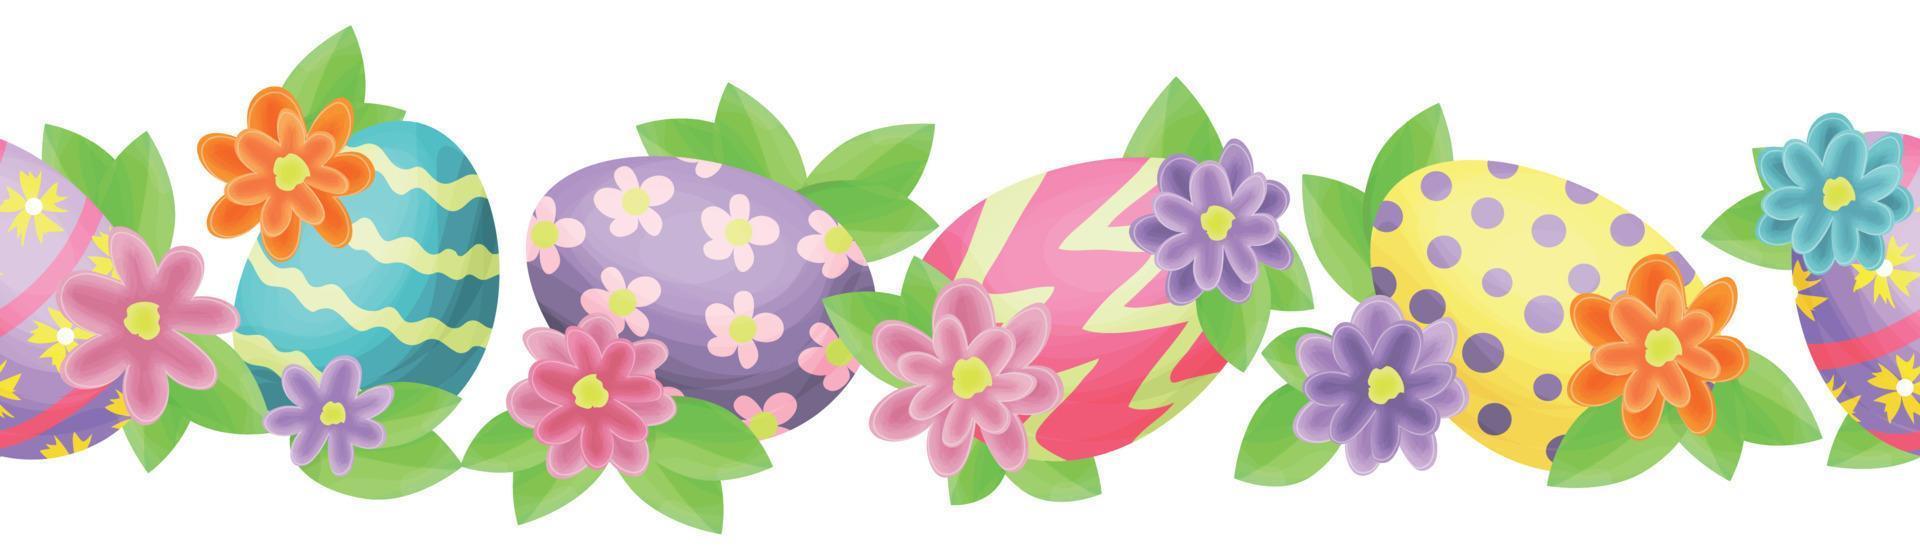 Seamless border. Easter eggs on the background of leaves, flowers. The eggs are pink, blue and yellow. Isolated vector illustration